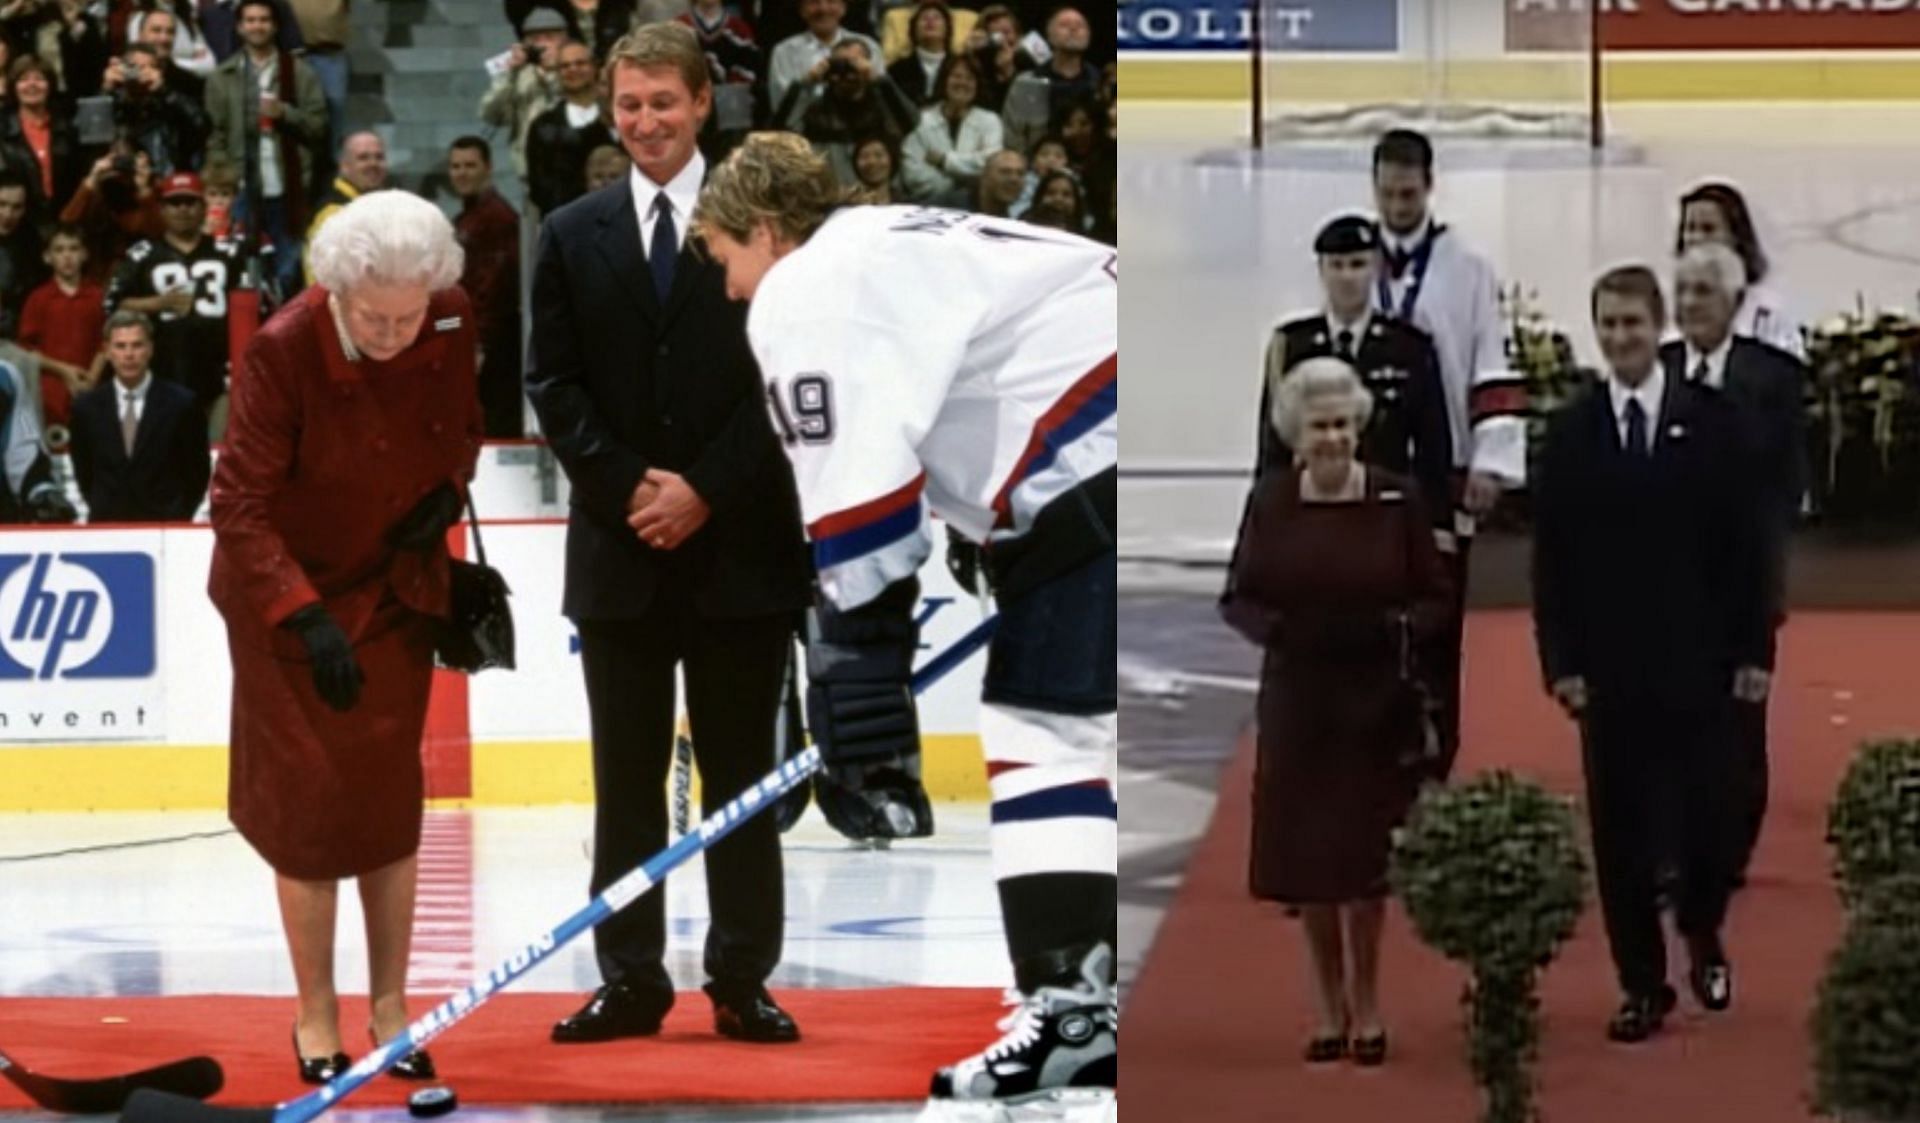 Wayne Gretzky once accompanied Queen Elizabeth II for a &quot;Royal Puck Drop&quot; at an exhibition game